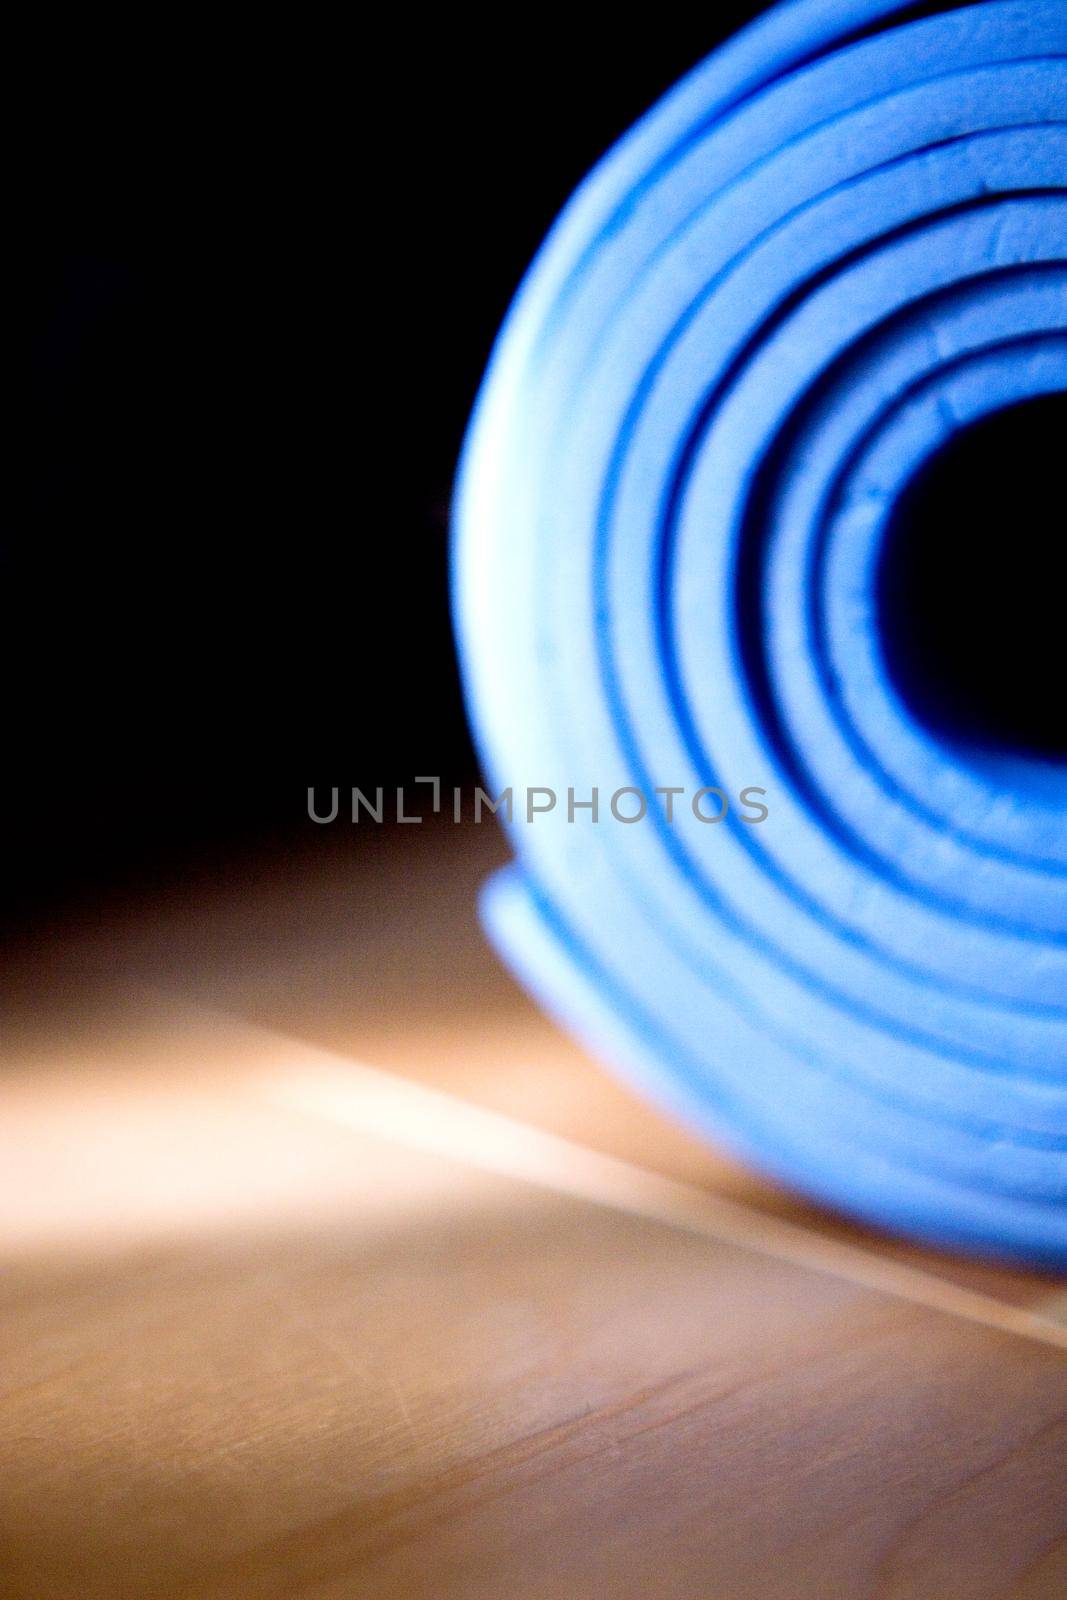 Yoga and Pilates mat rolled up on the floor by GemaIbarra